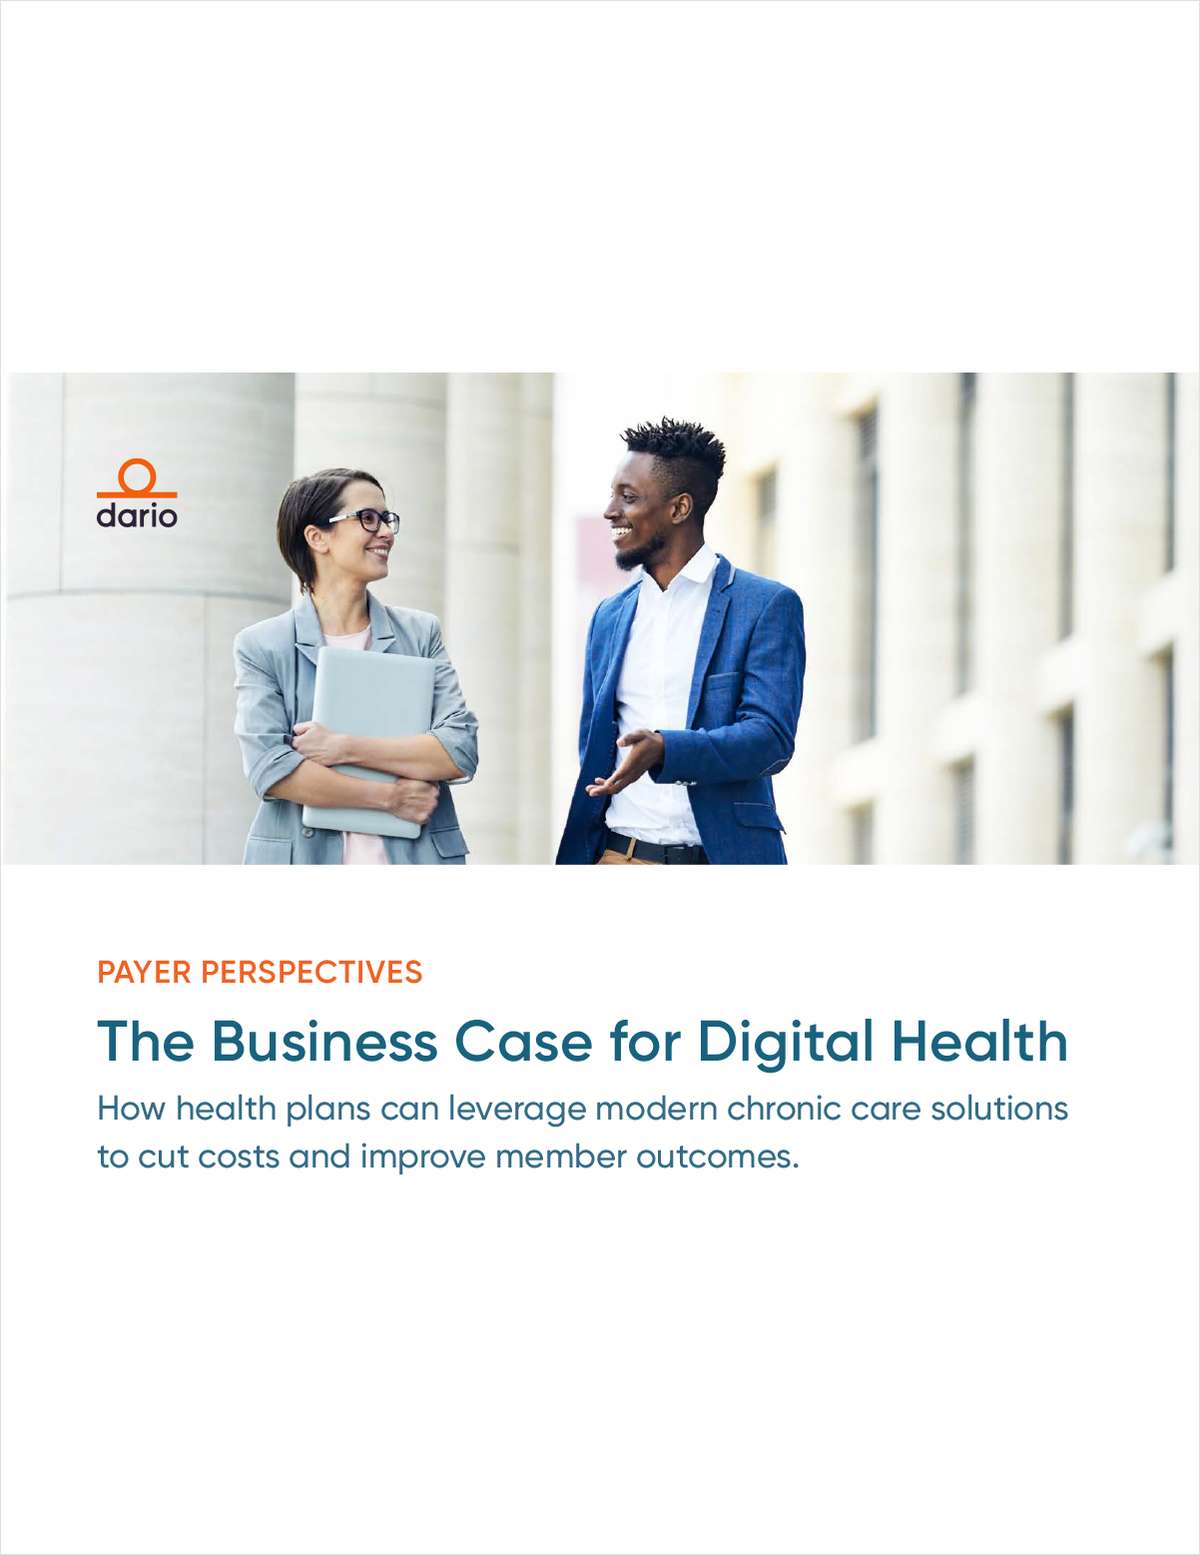 The Business Case for Digital Health: Chronic care solutions to cut costs and improve member outcomes